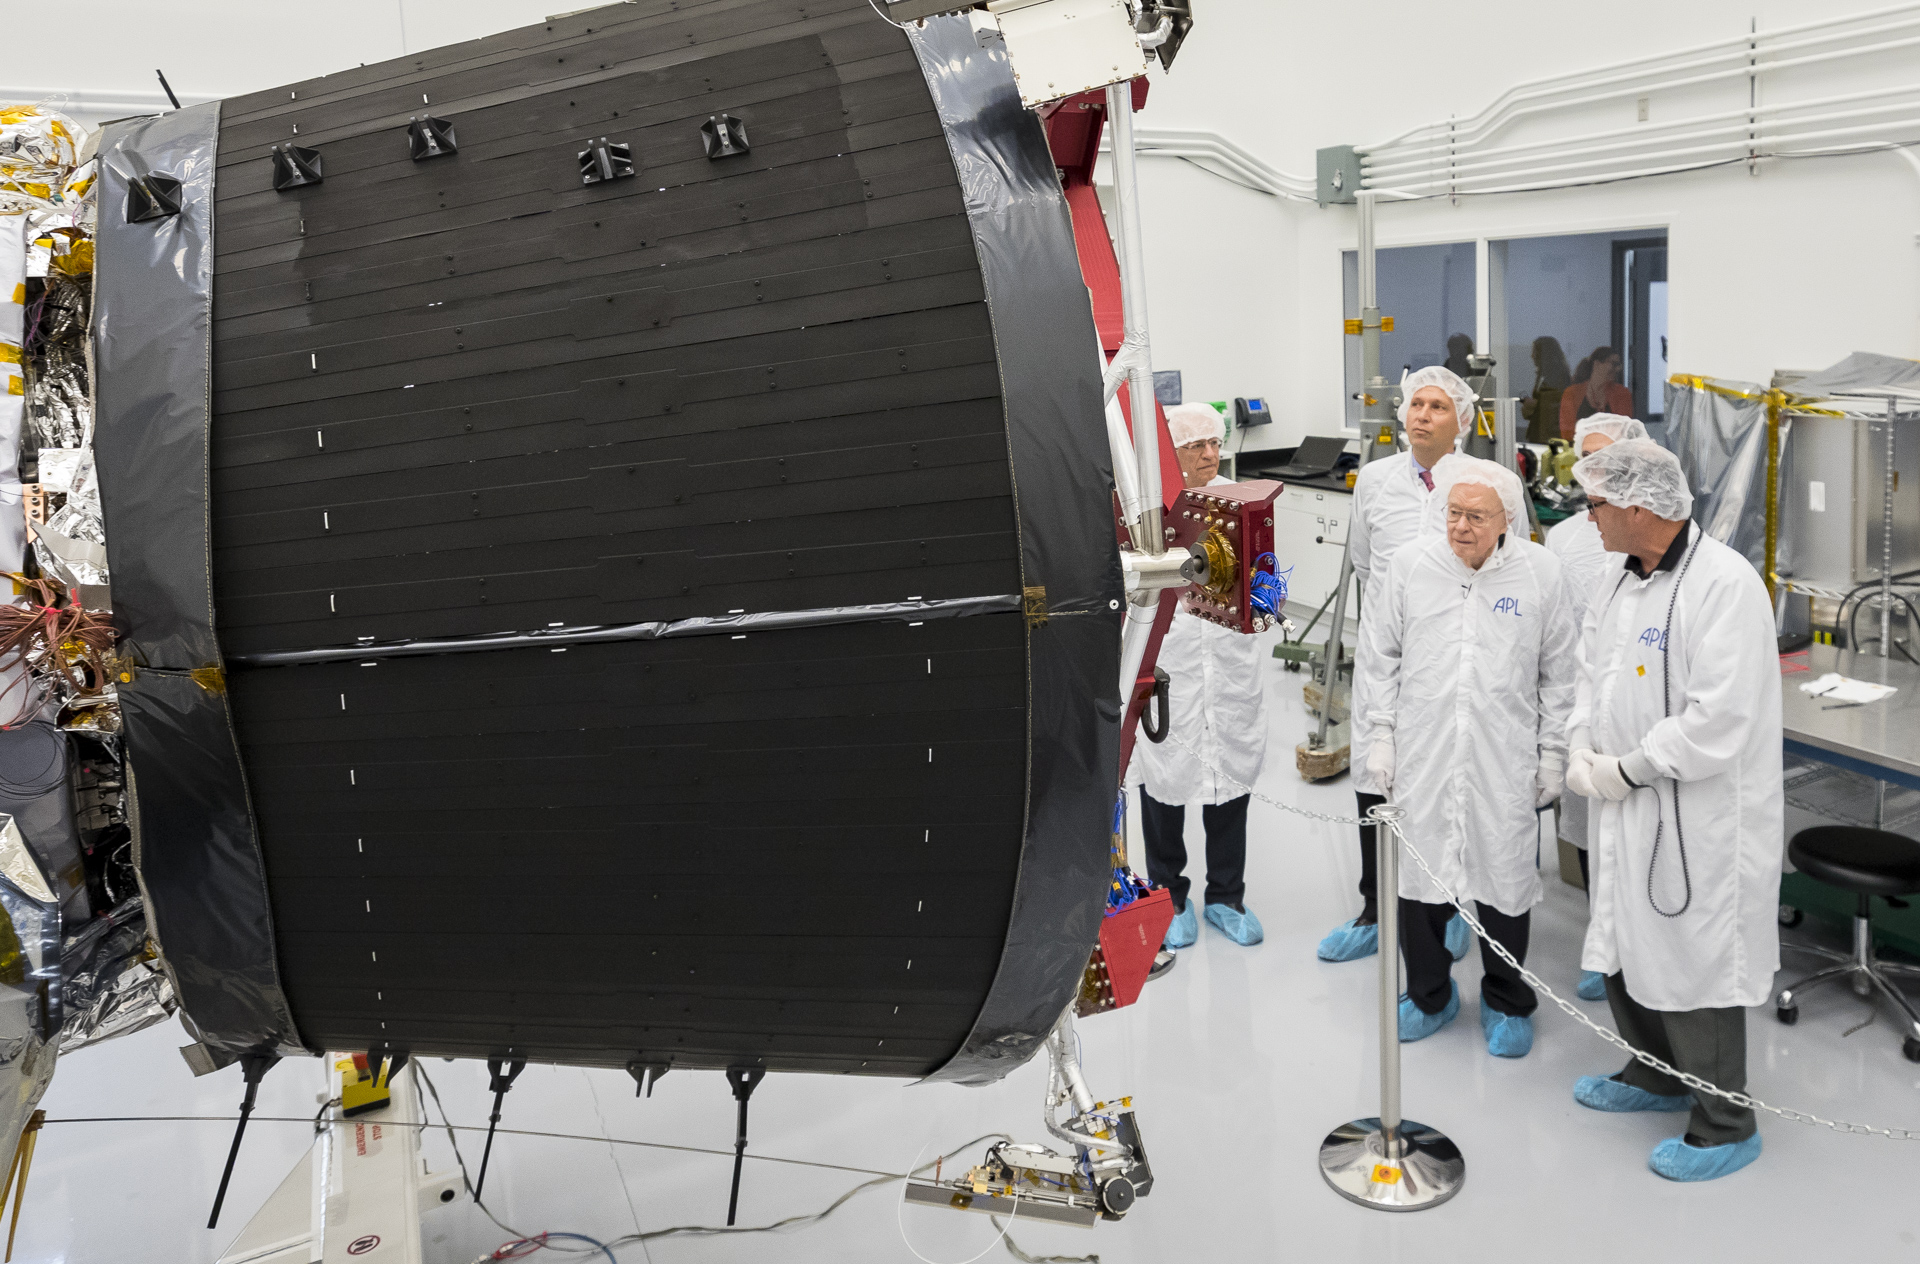 On Oct. 3, 2017, Eugene Parker, professor emeritus at the University of Chicago, visits the spacecraft that bears his name, NASA’s Parker Solar Probe, at the Johns Hopkins Applied Physics Laboratory in Laurel, Maryland, where the probe was designed and is being built. The large black structure is one of the spacecraft's massive cooling radiators. The spacecraft is humanity’s first mission to a star, traveling directly through the Sun’s atmosphere.